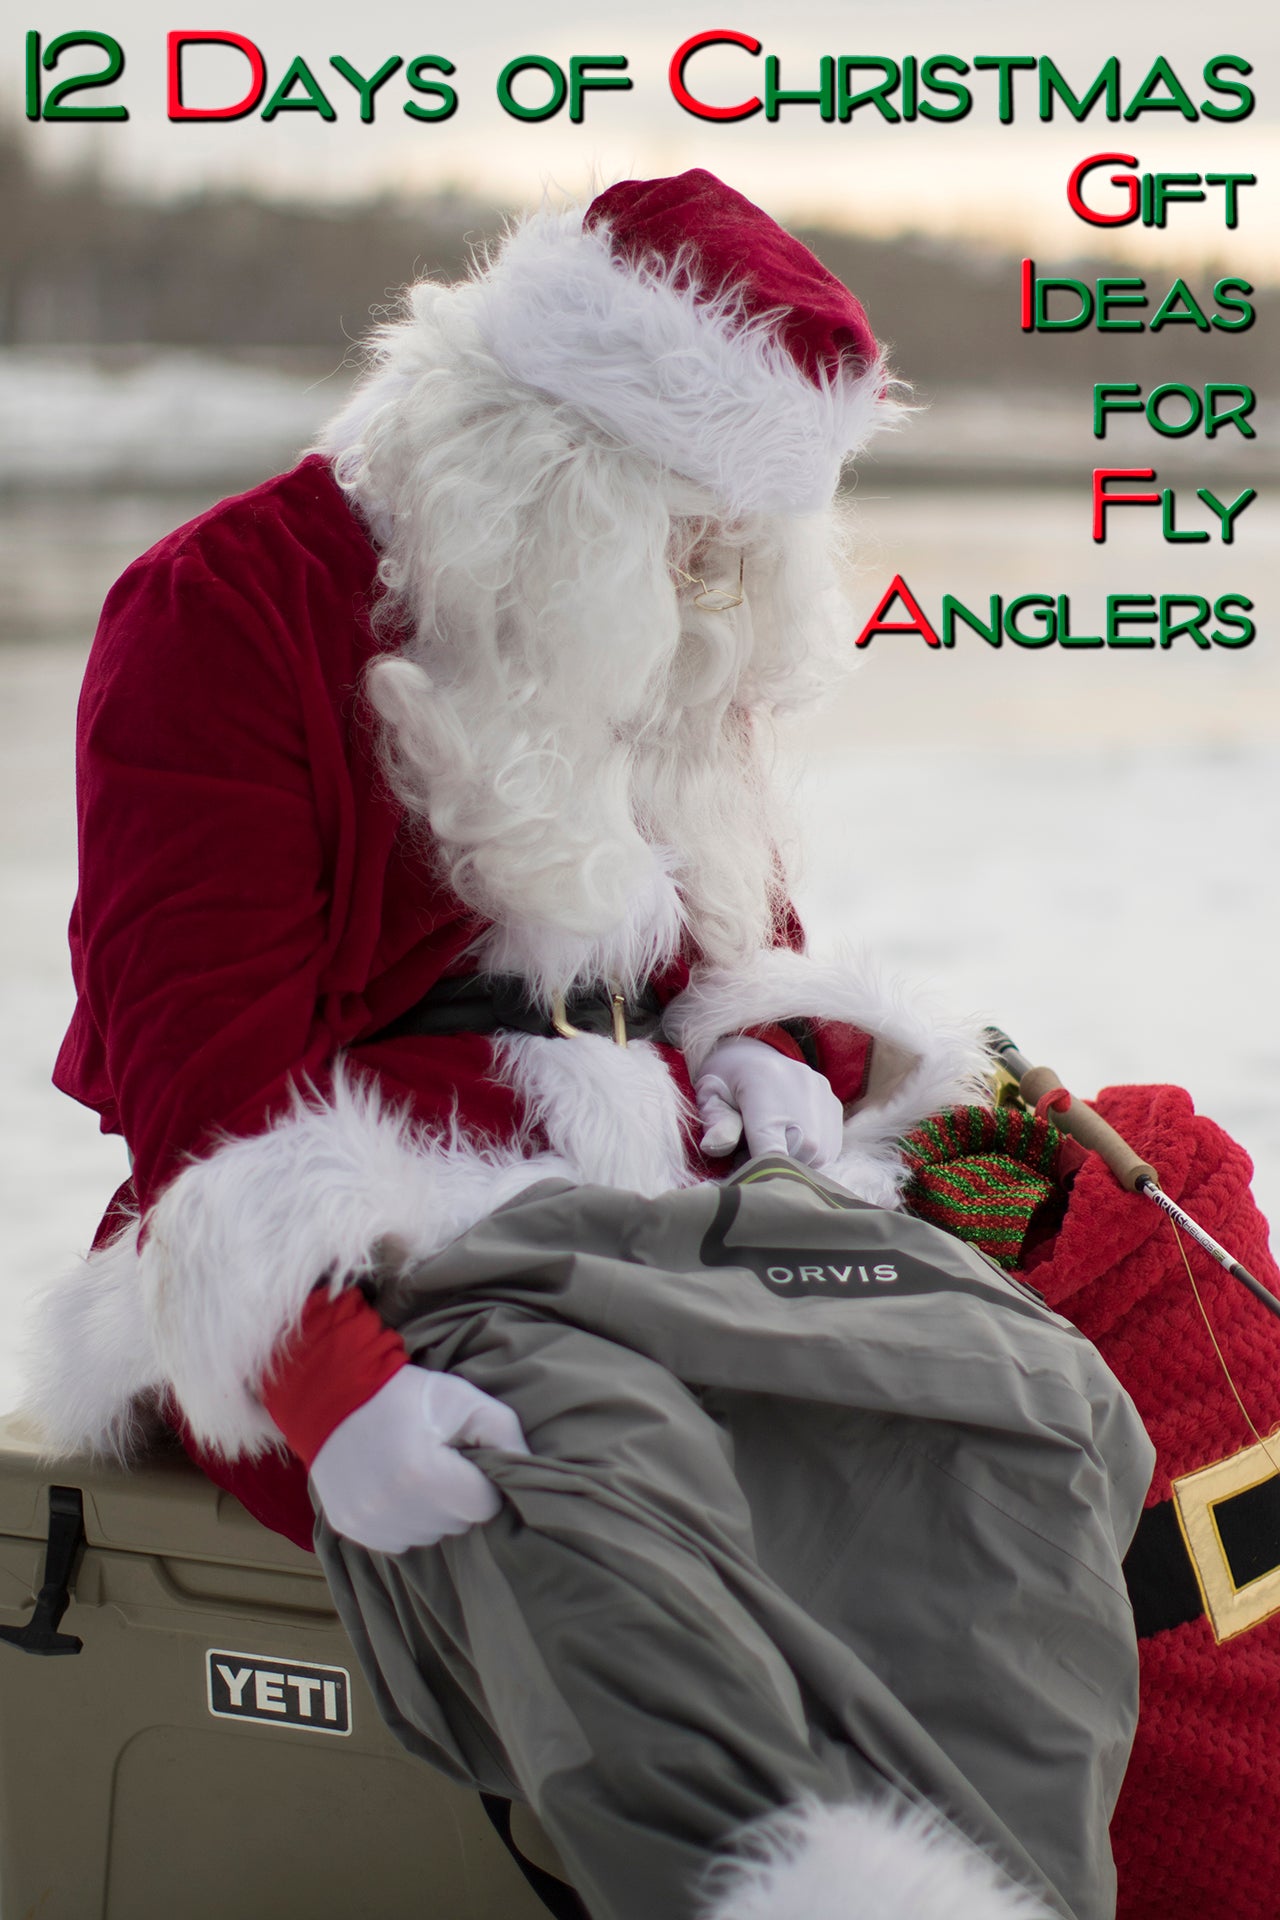 12 Days of Christmas Gift Ideas for Fly Anglers (2022 Edition)